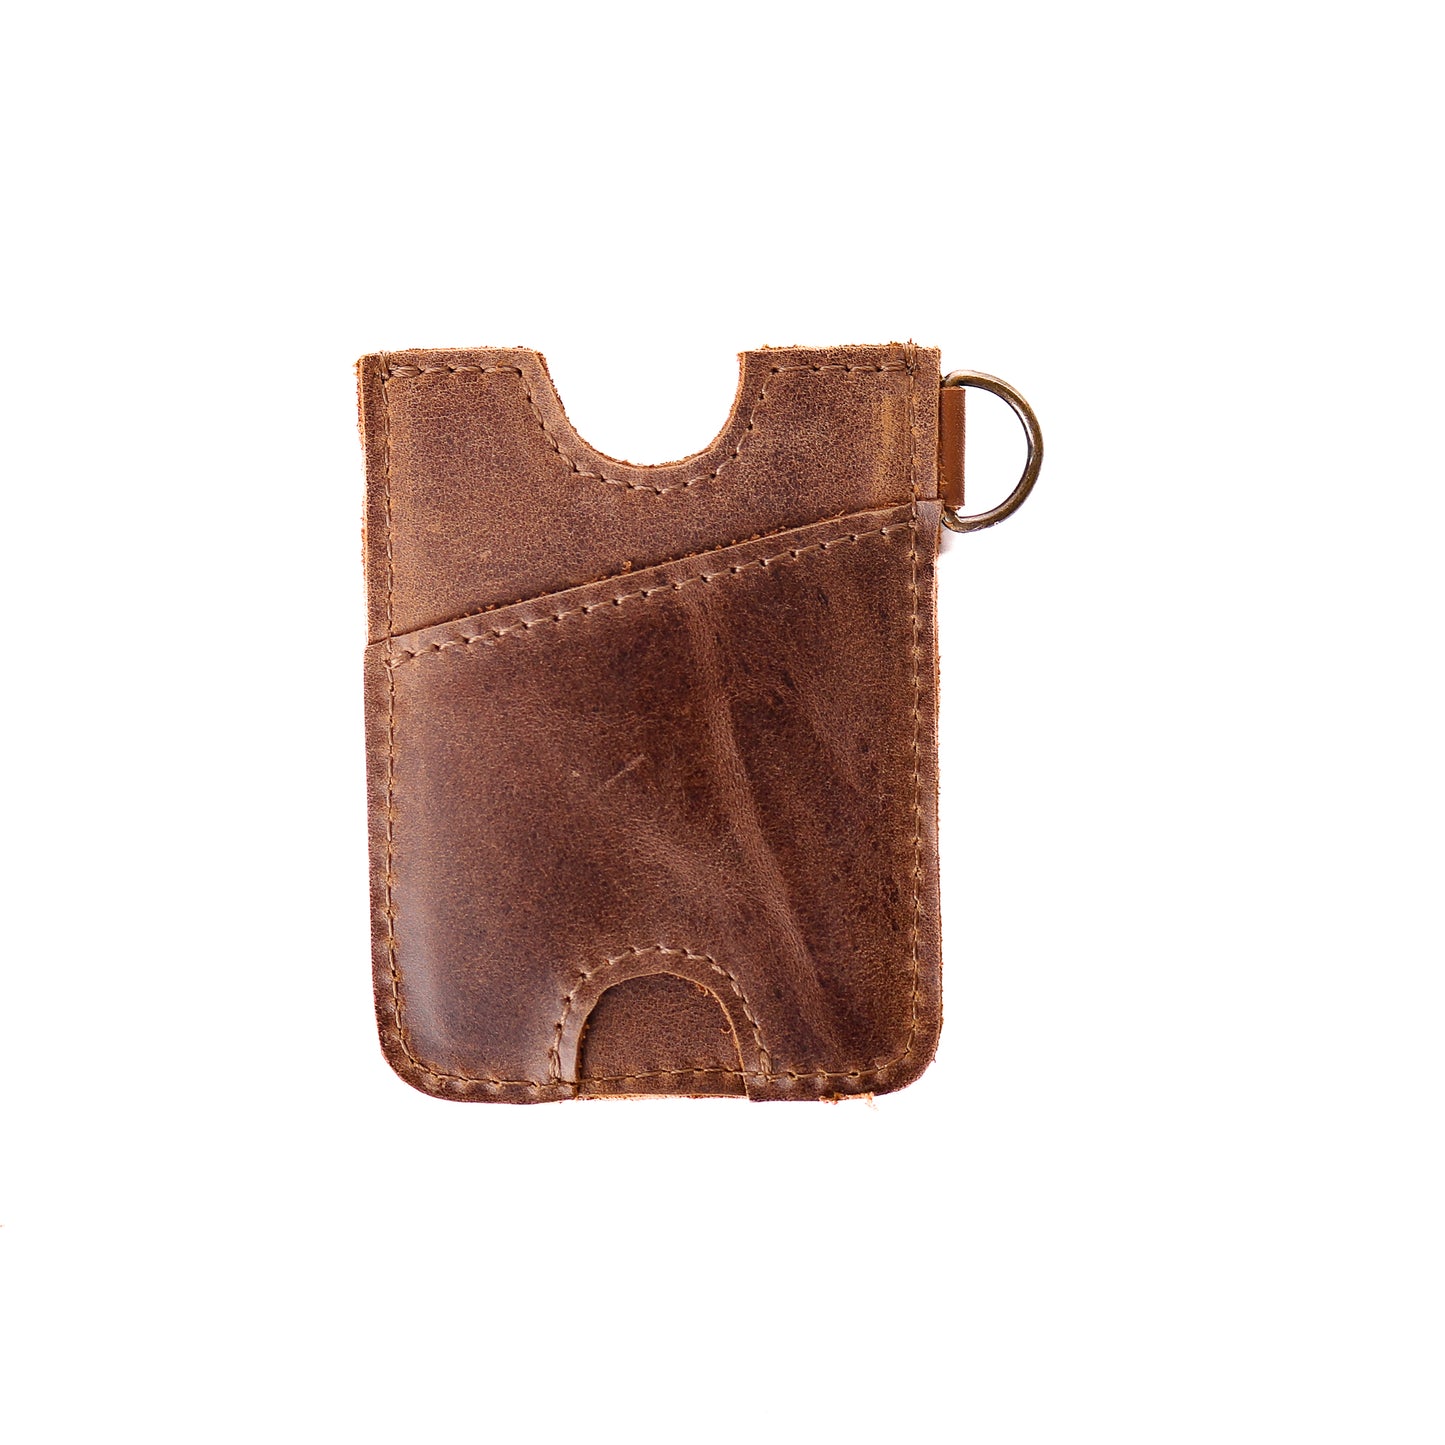 SLIM CARD WALLET - FULL LEATHER - CAOBA